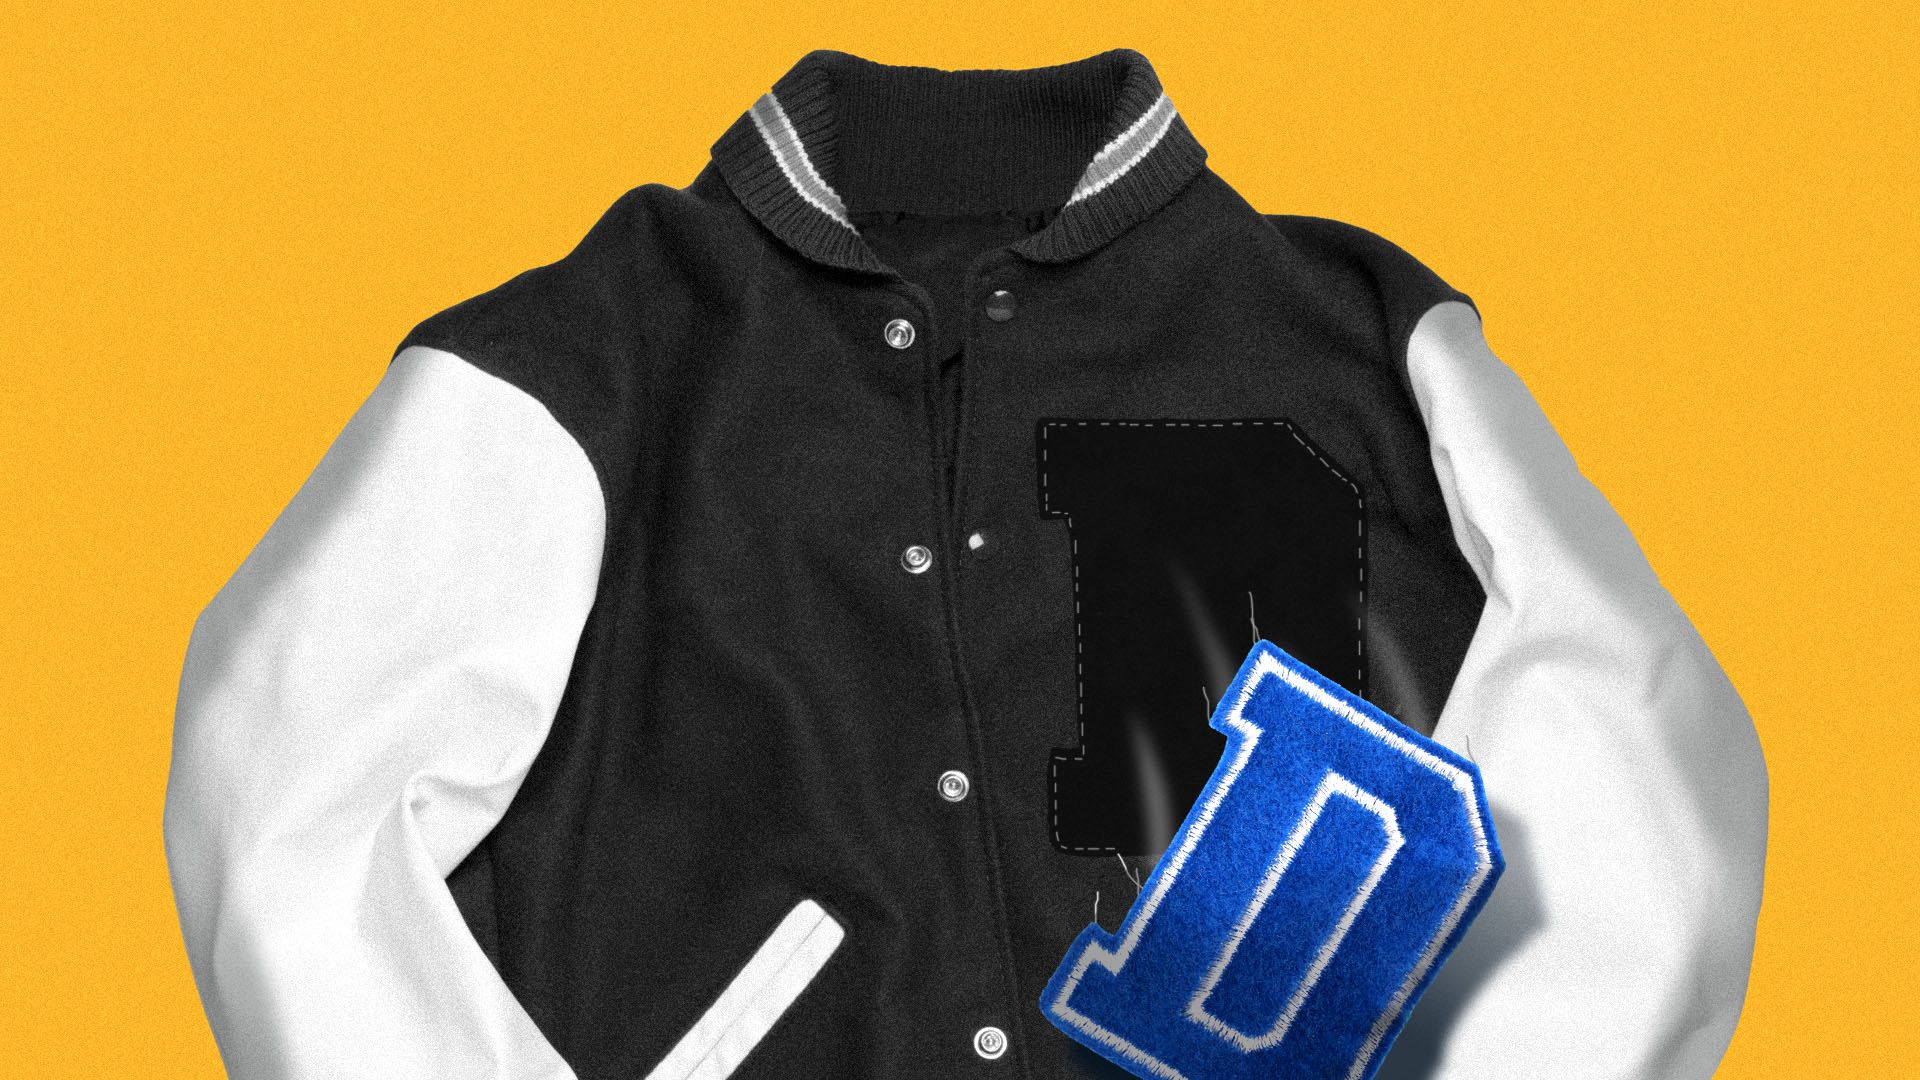 Letter jacket with a "D" falling off